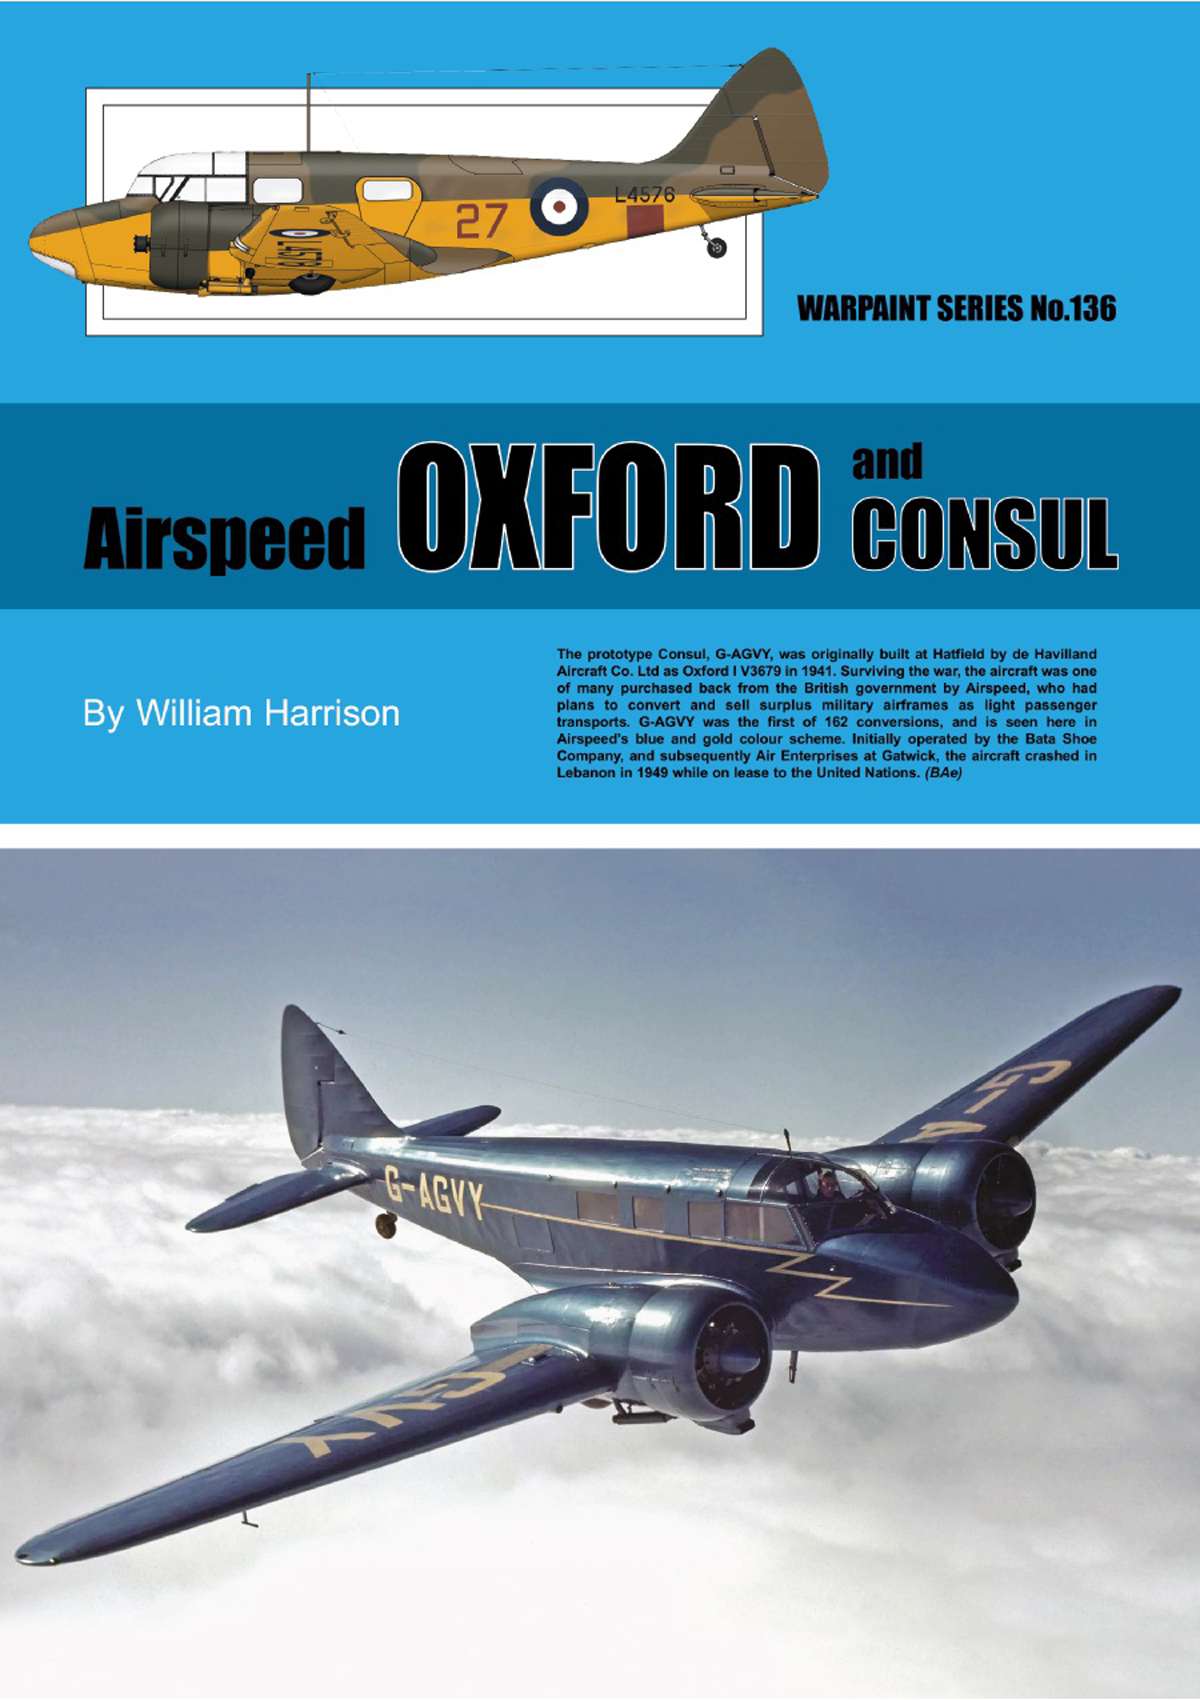 N136 - Airspeed Oxford and Consul